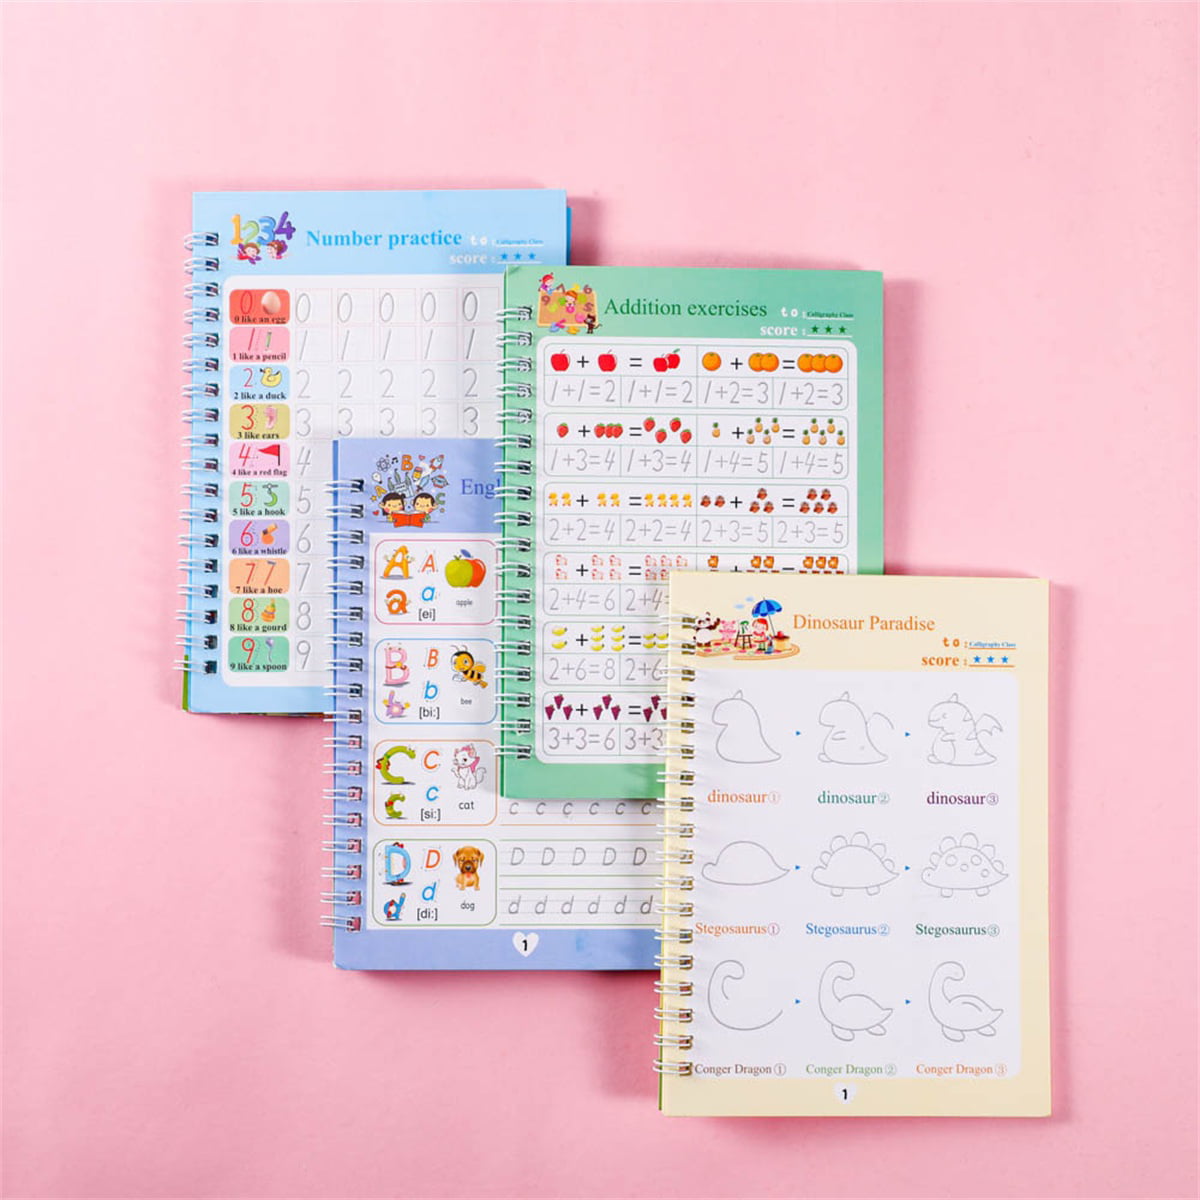 12 Pieces Reusable Kids Practice Copybook Set with Pen Magic Calligraphy Number Tracing Book for Preschoolers Kids Children Calligraphic Letter Writing Drawing Mathematics Writing Paste Board 